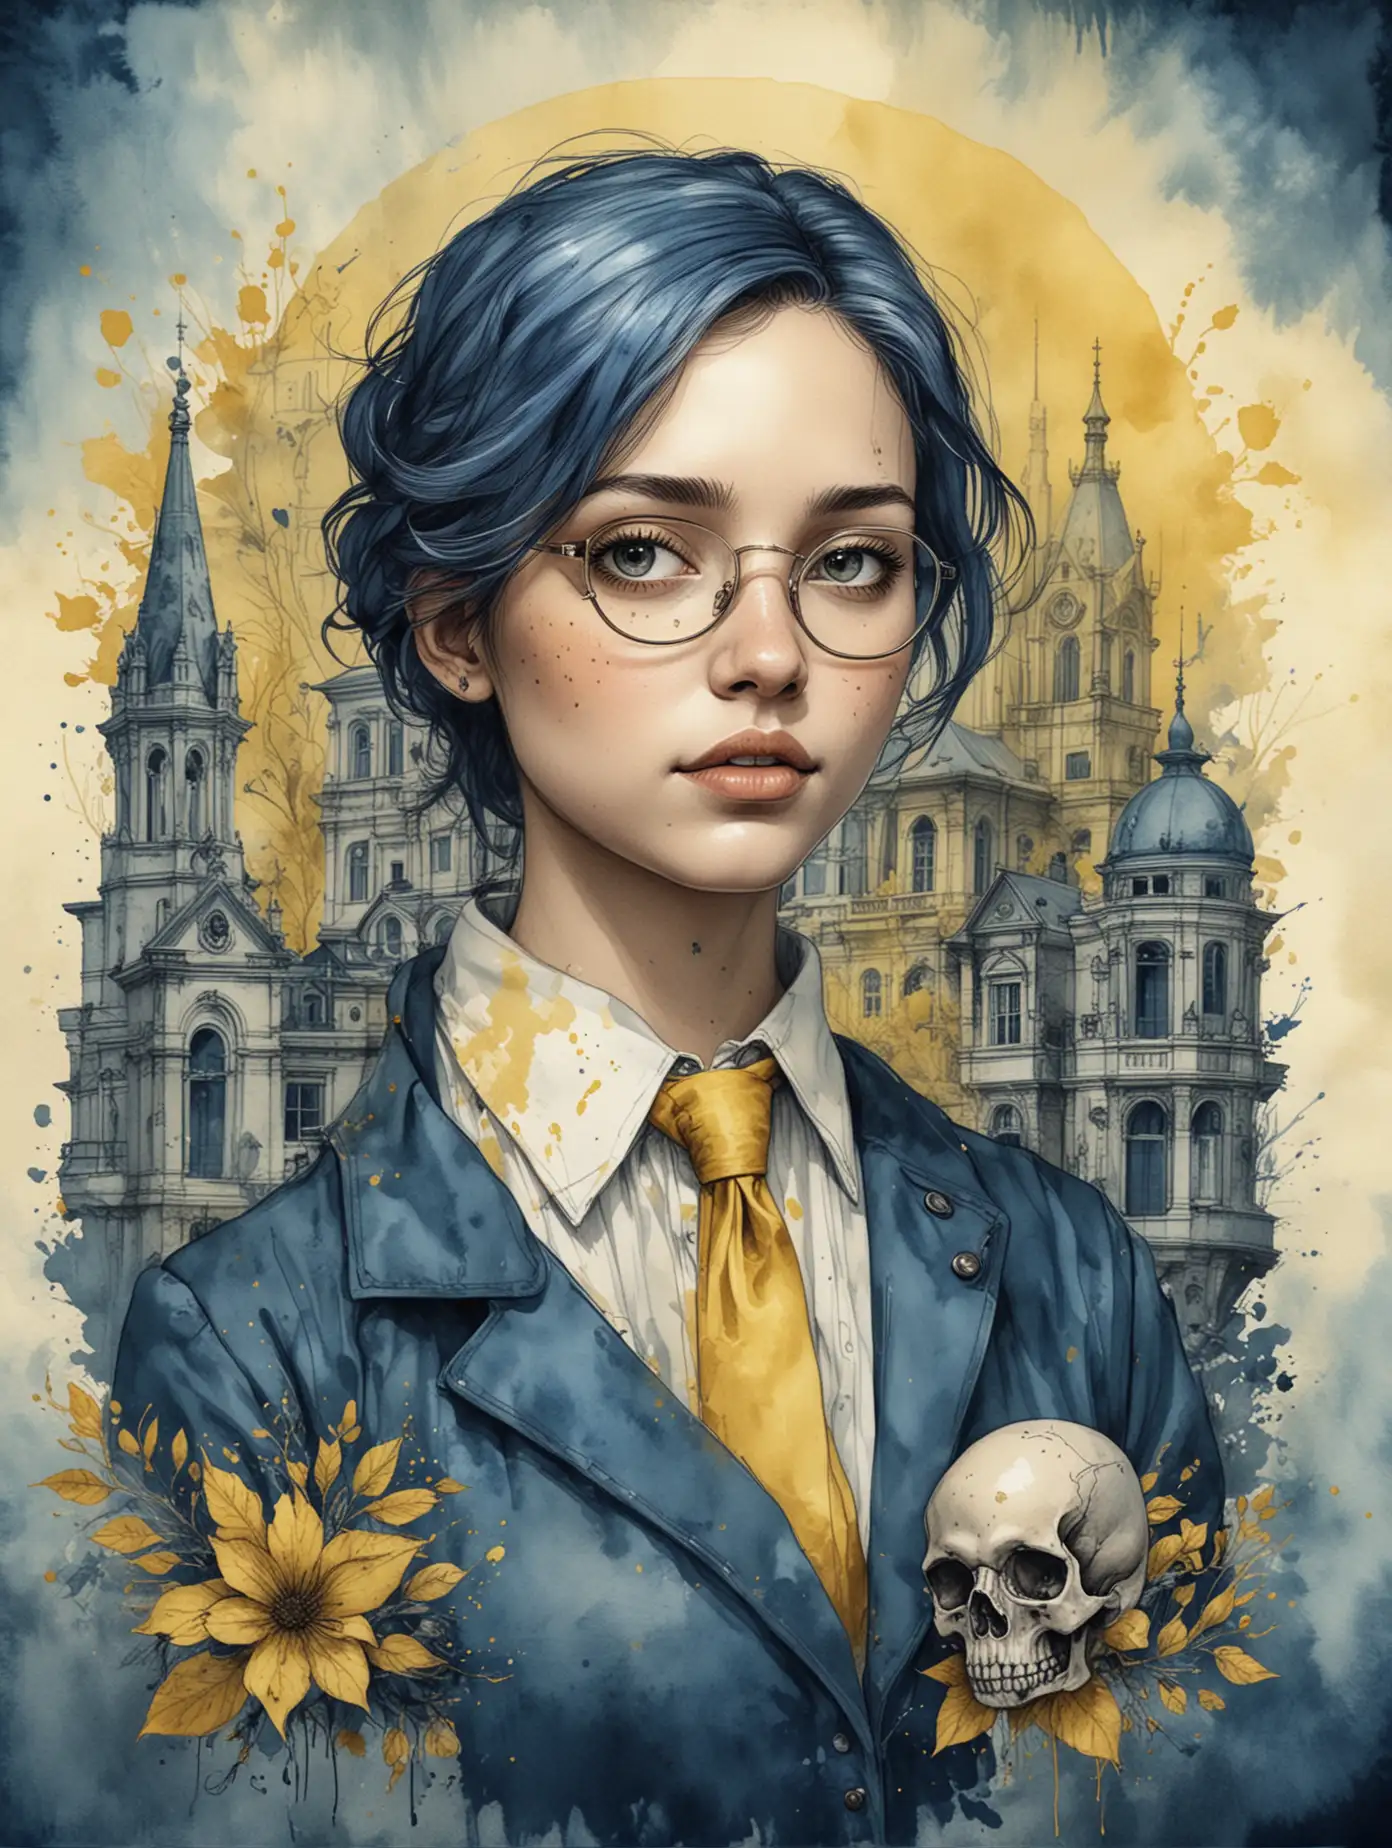 Digital illustration, dark academia, 300dpi, Graphic Art, in a yellow and blue watercolour and ink wash